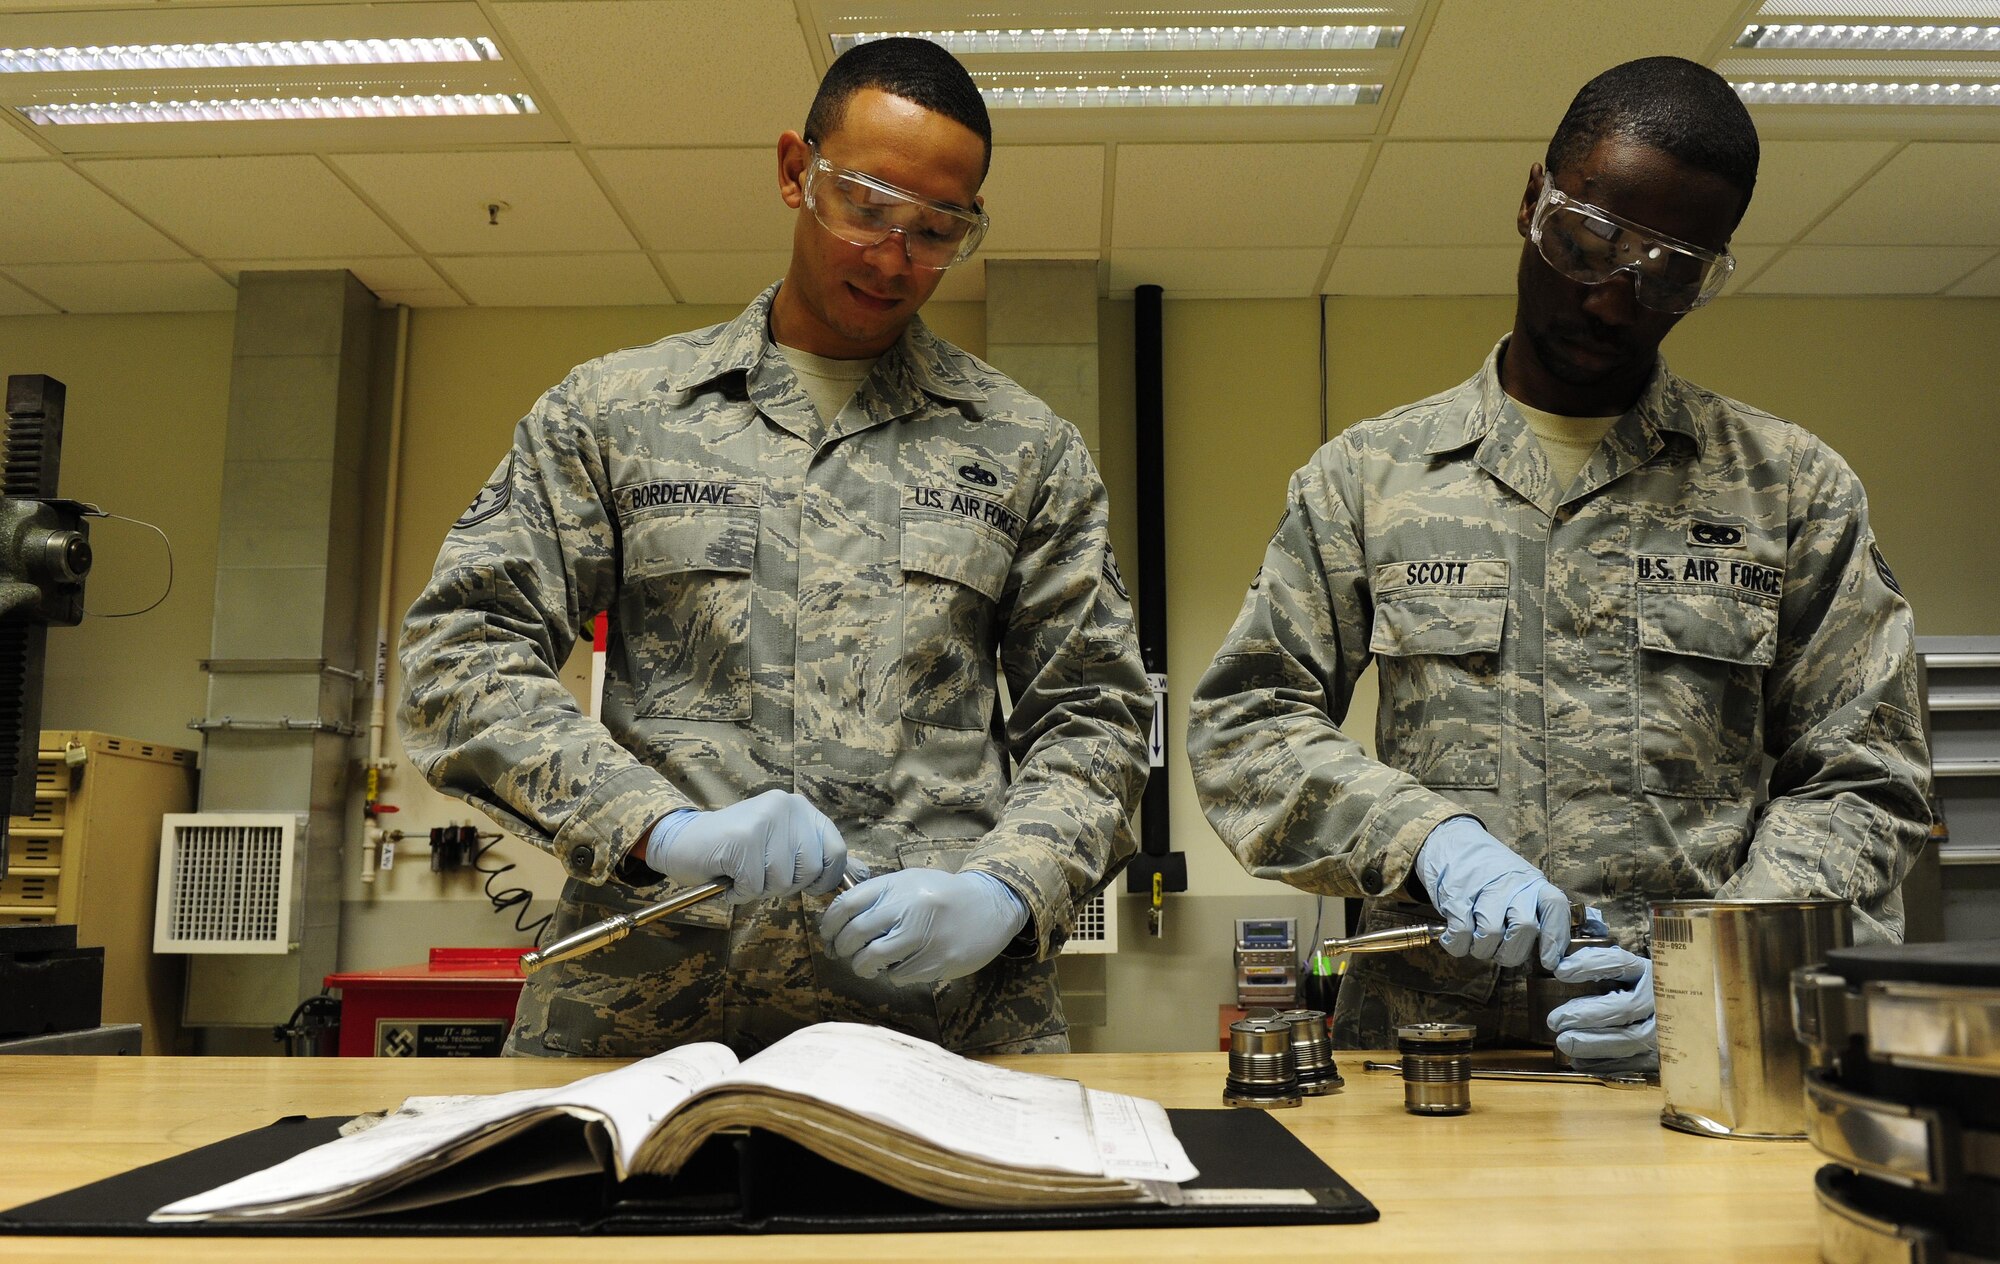 Staff Sgt. Aljhaun Bordenave, 8th Maintenance Squadron hydraulics section chief, and Senior Airman Isaiah Scott, 8th MXS hydraulics journeyman, assemble landing gear brakes at Kunsan Air Base, Republic of Korea, Oct. 29, 2015. The hydraulics section is responsible for supporting the flight line, phase dock and aerospace ground equipment flight by rebuilding hydraulic components. (U.S. Air Force photo by Staff Sgt. Nick Wilson/Released)